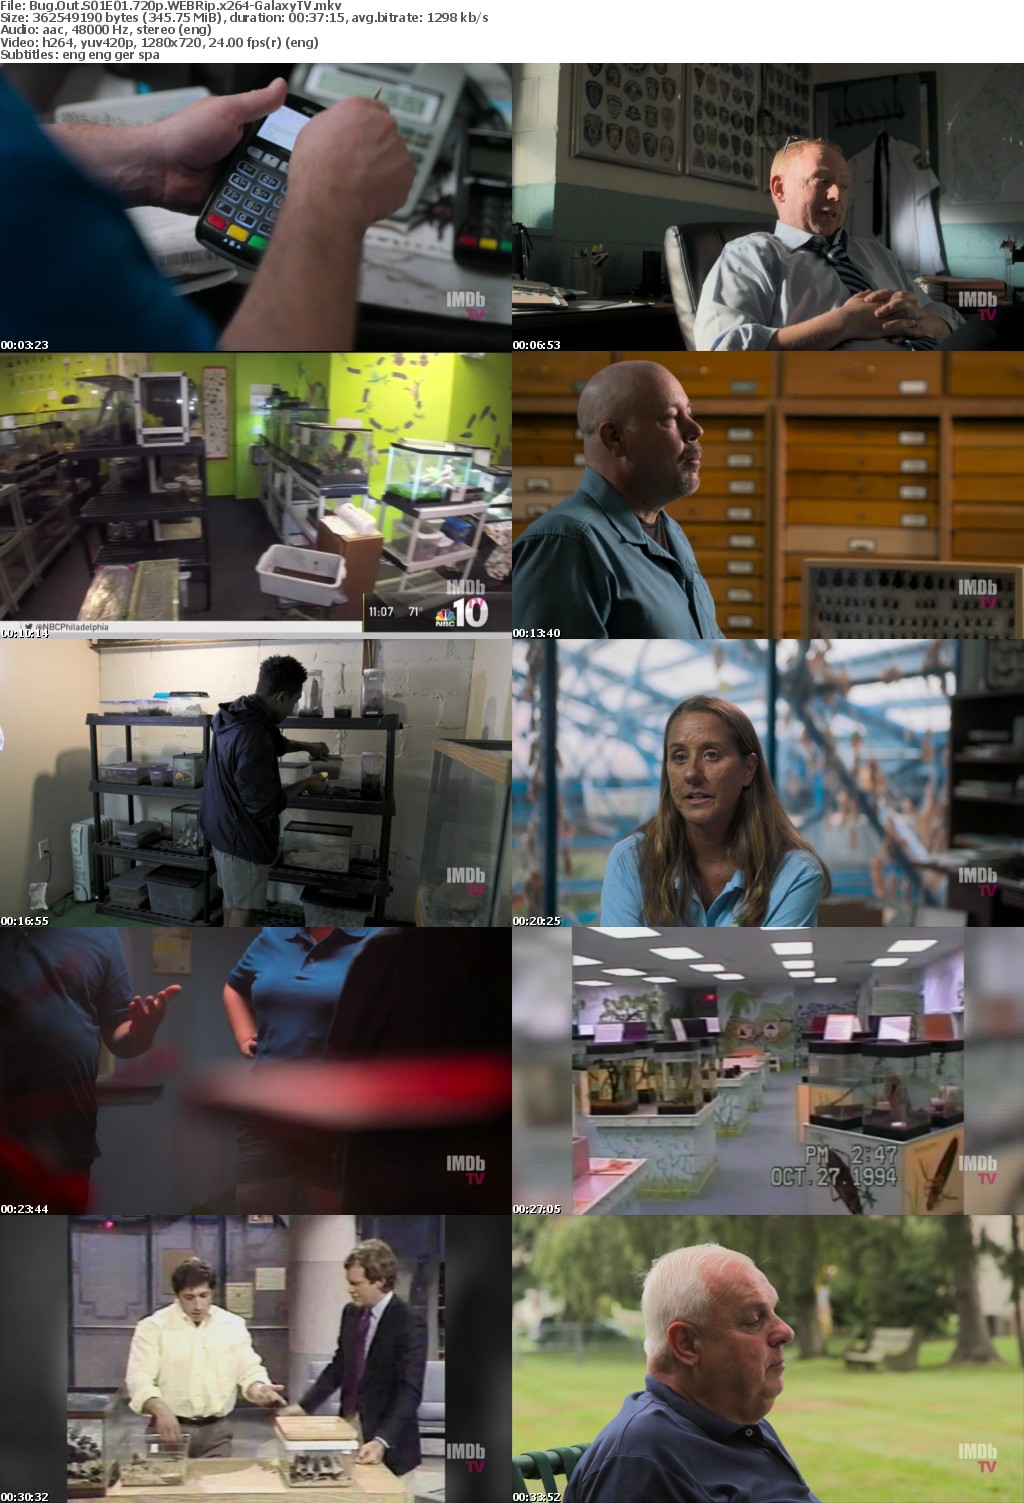 Bug Out S01 COMPLETE 720p WEBRip x264-GalaxyTV